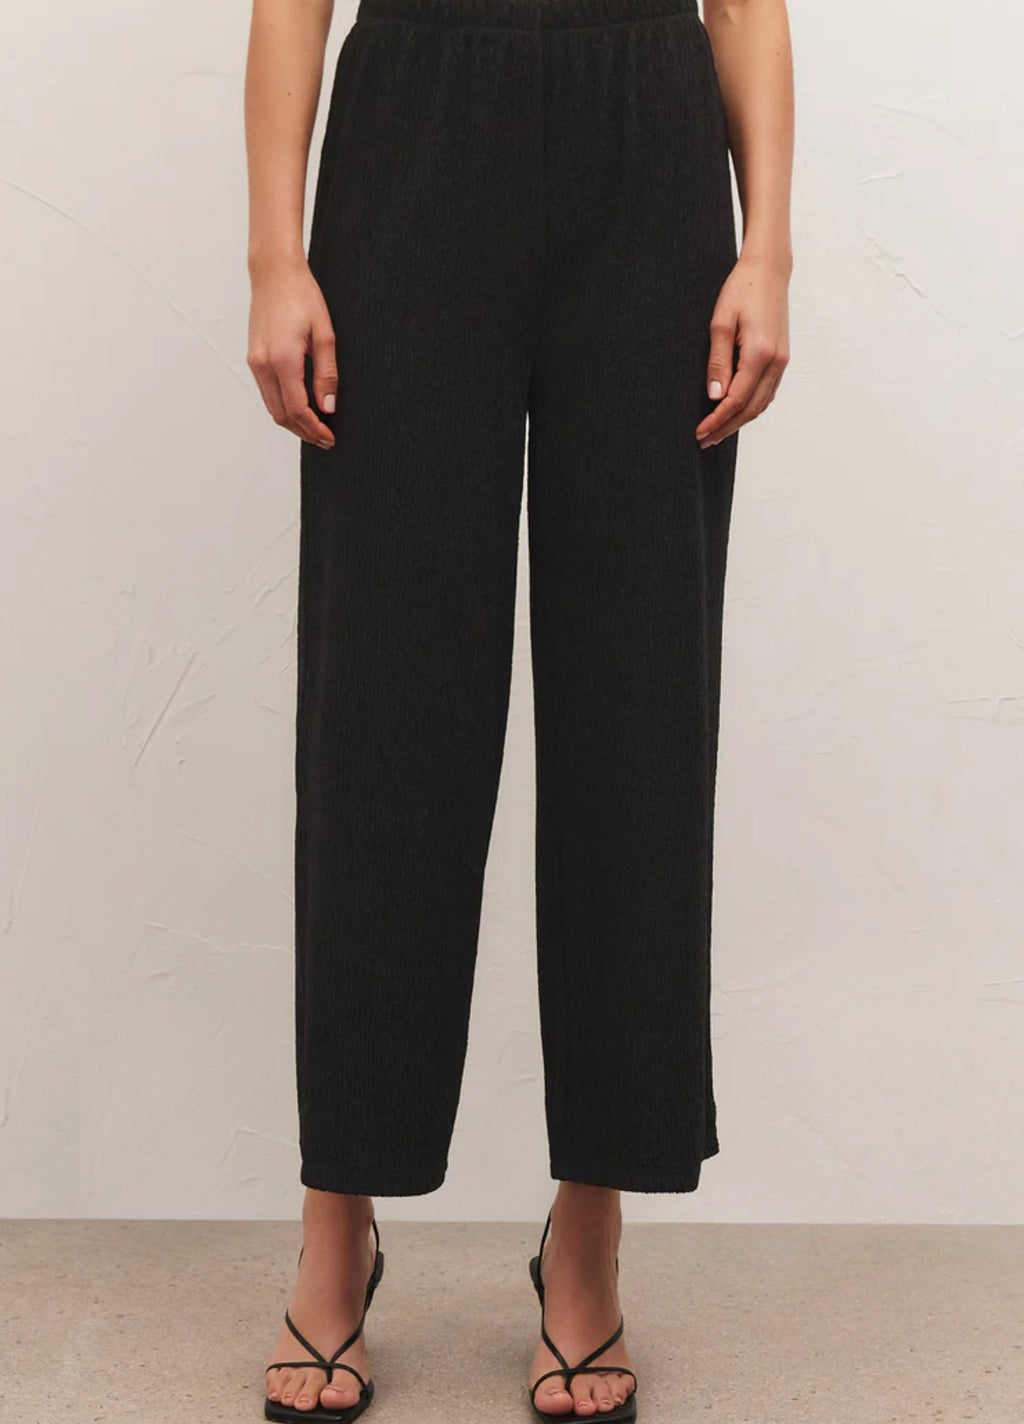 Z SUPPLY </br>Crinkle Scout Pant